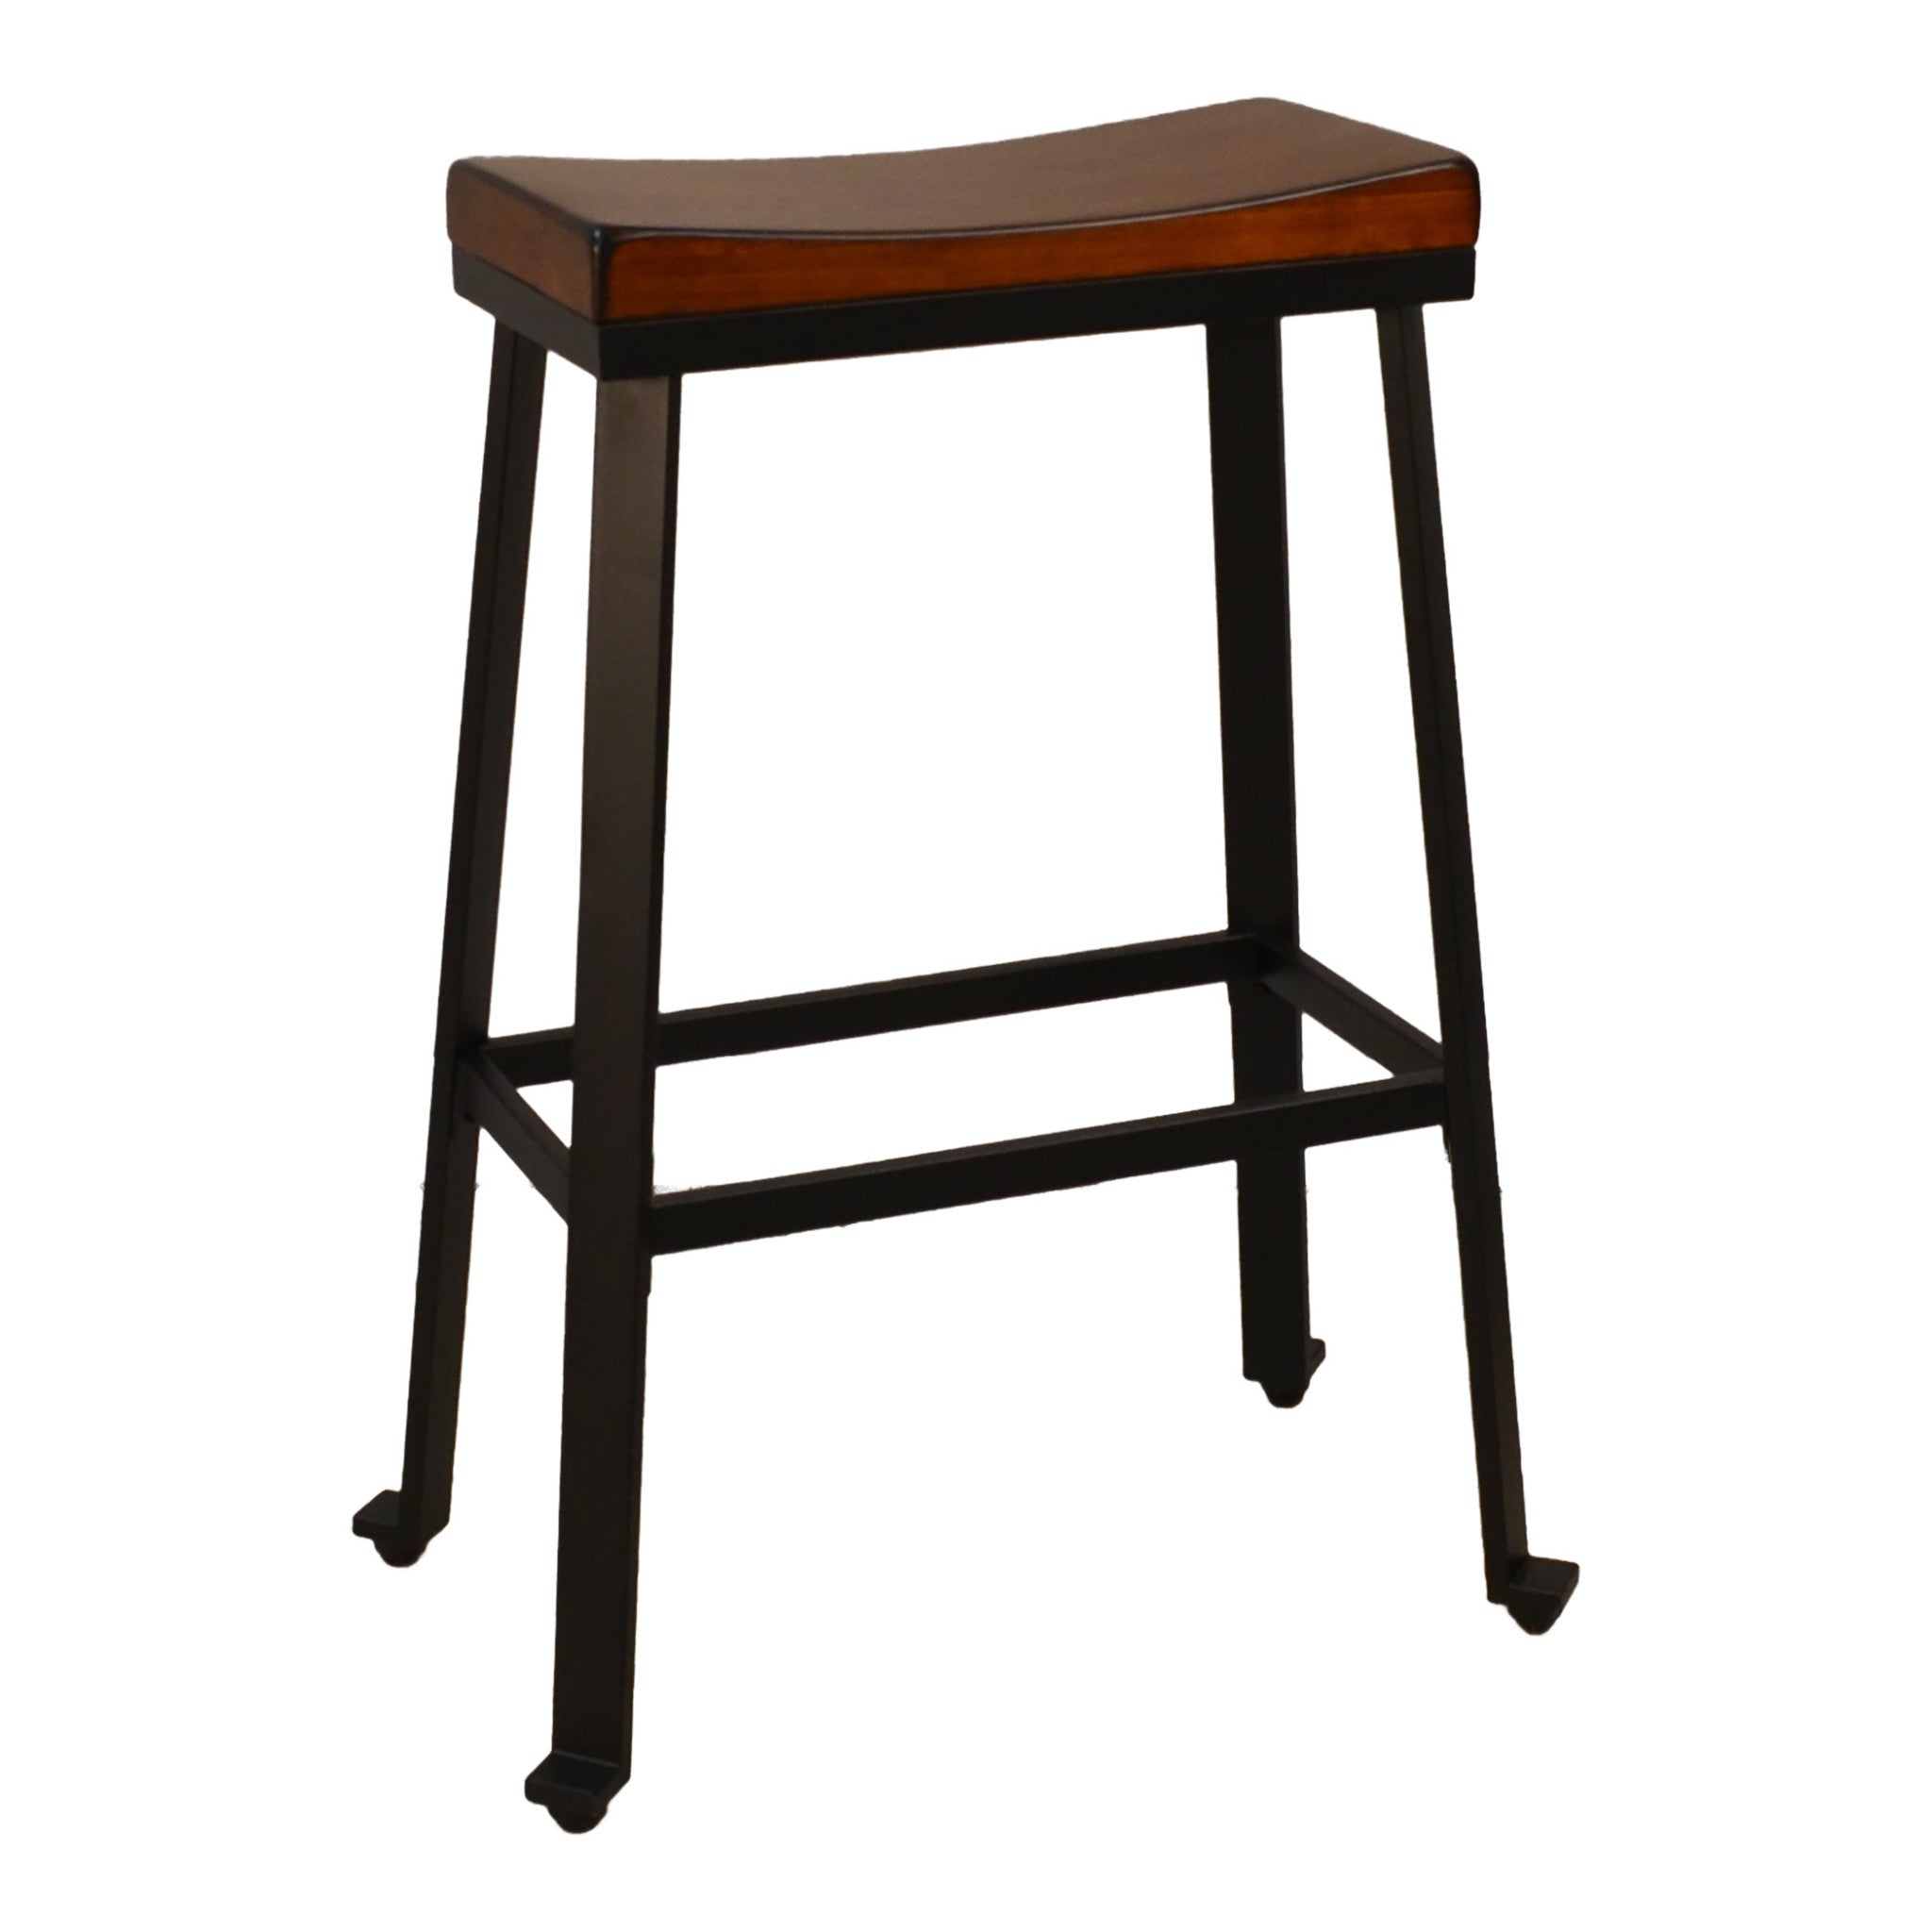 30" Chestnut And Black Steel Backless Bar Height Chair With Footrest